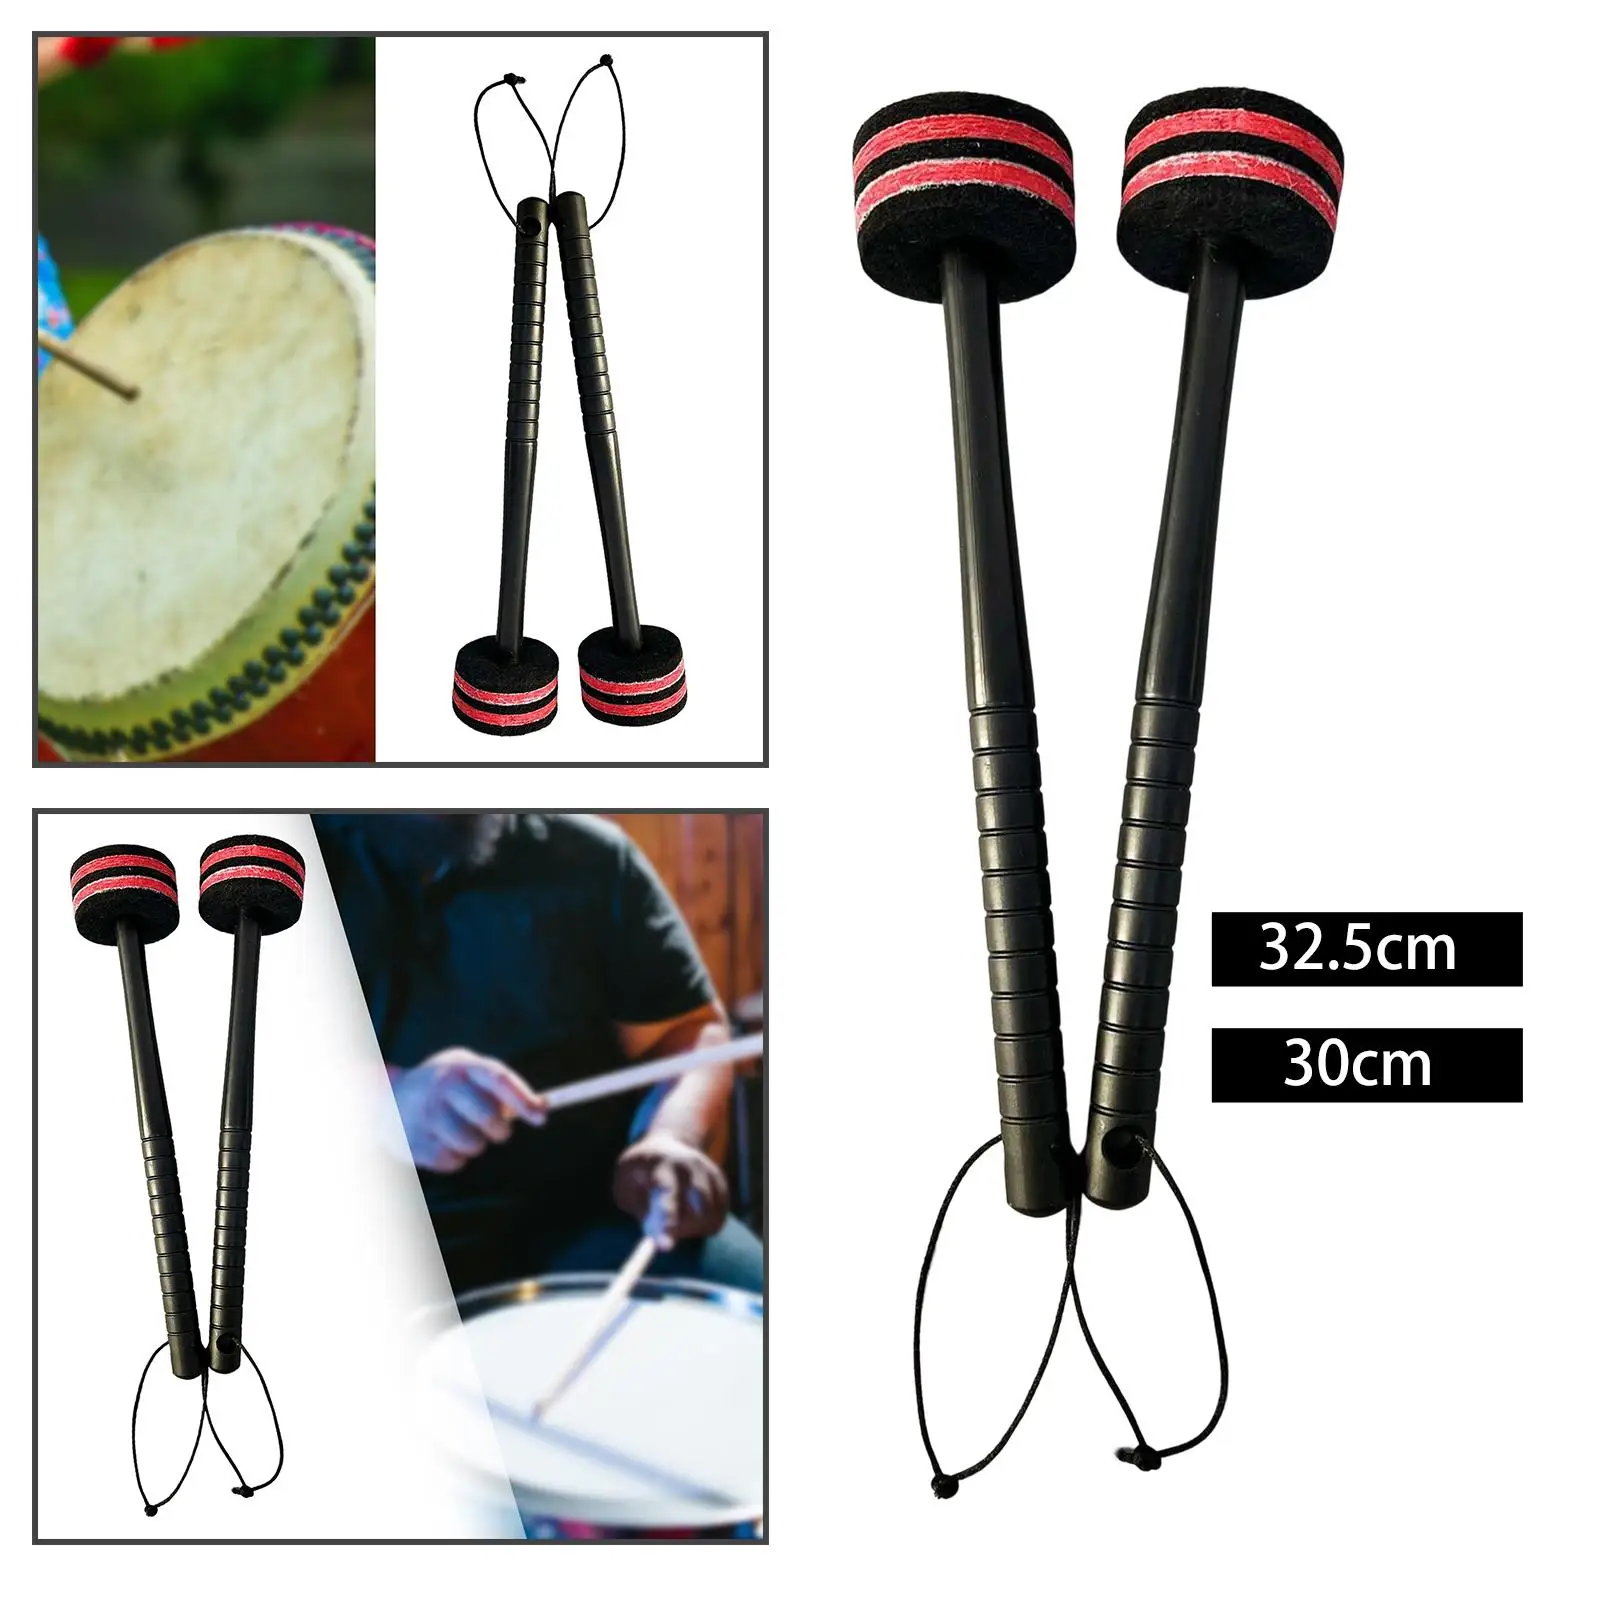 2x Snare Drum Mallet Musical Instrument Accessories Felt Mallet Timpani Mallet Timpani Stick for Child Drummers Adults